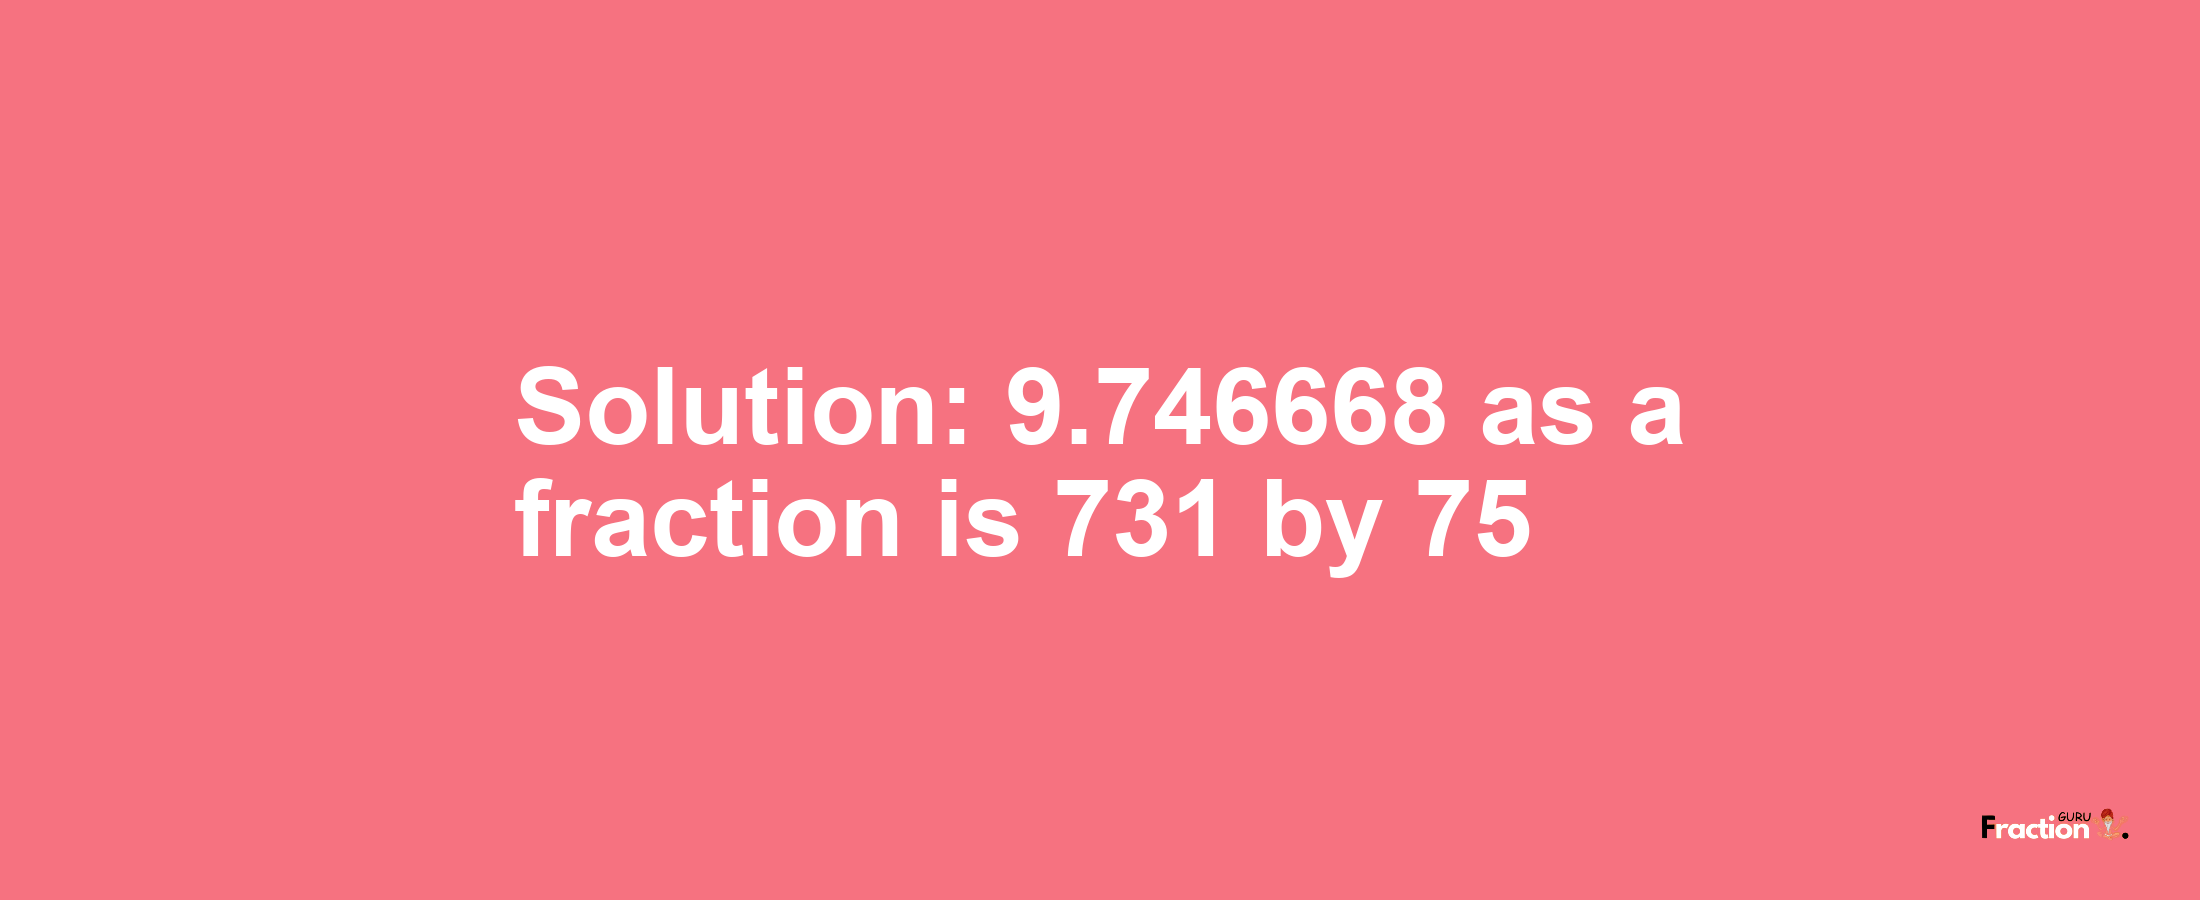 Solution:9.746668 as a fraction is 731/75